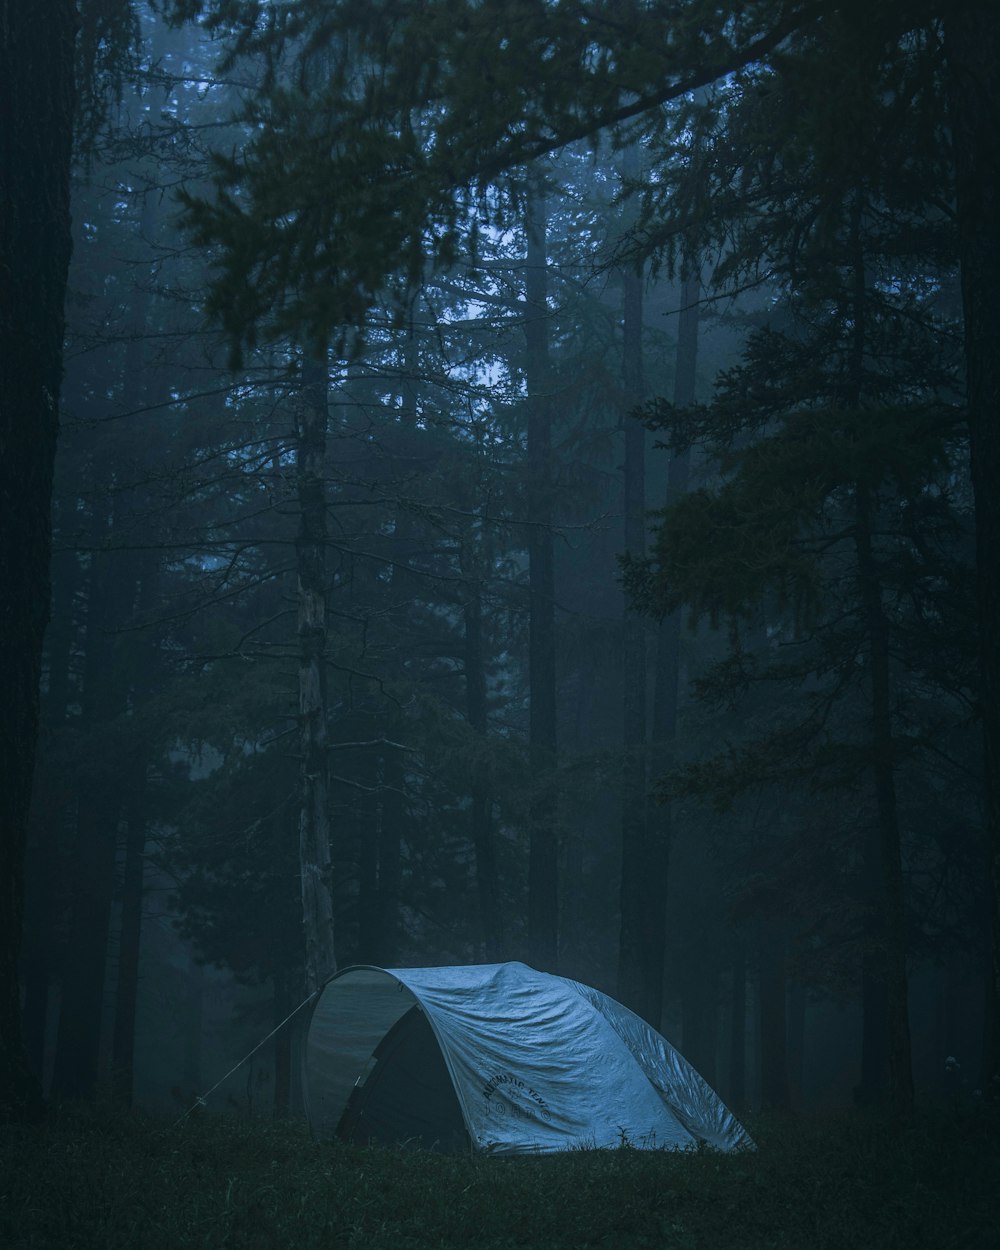 green tent in the middle of the forest